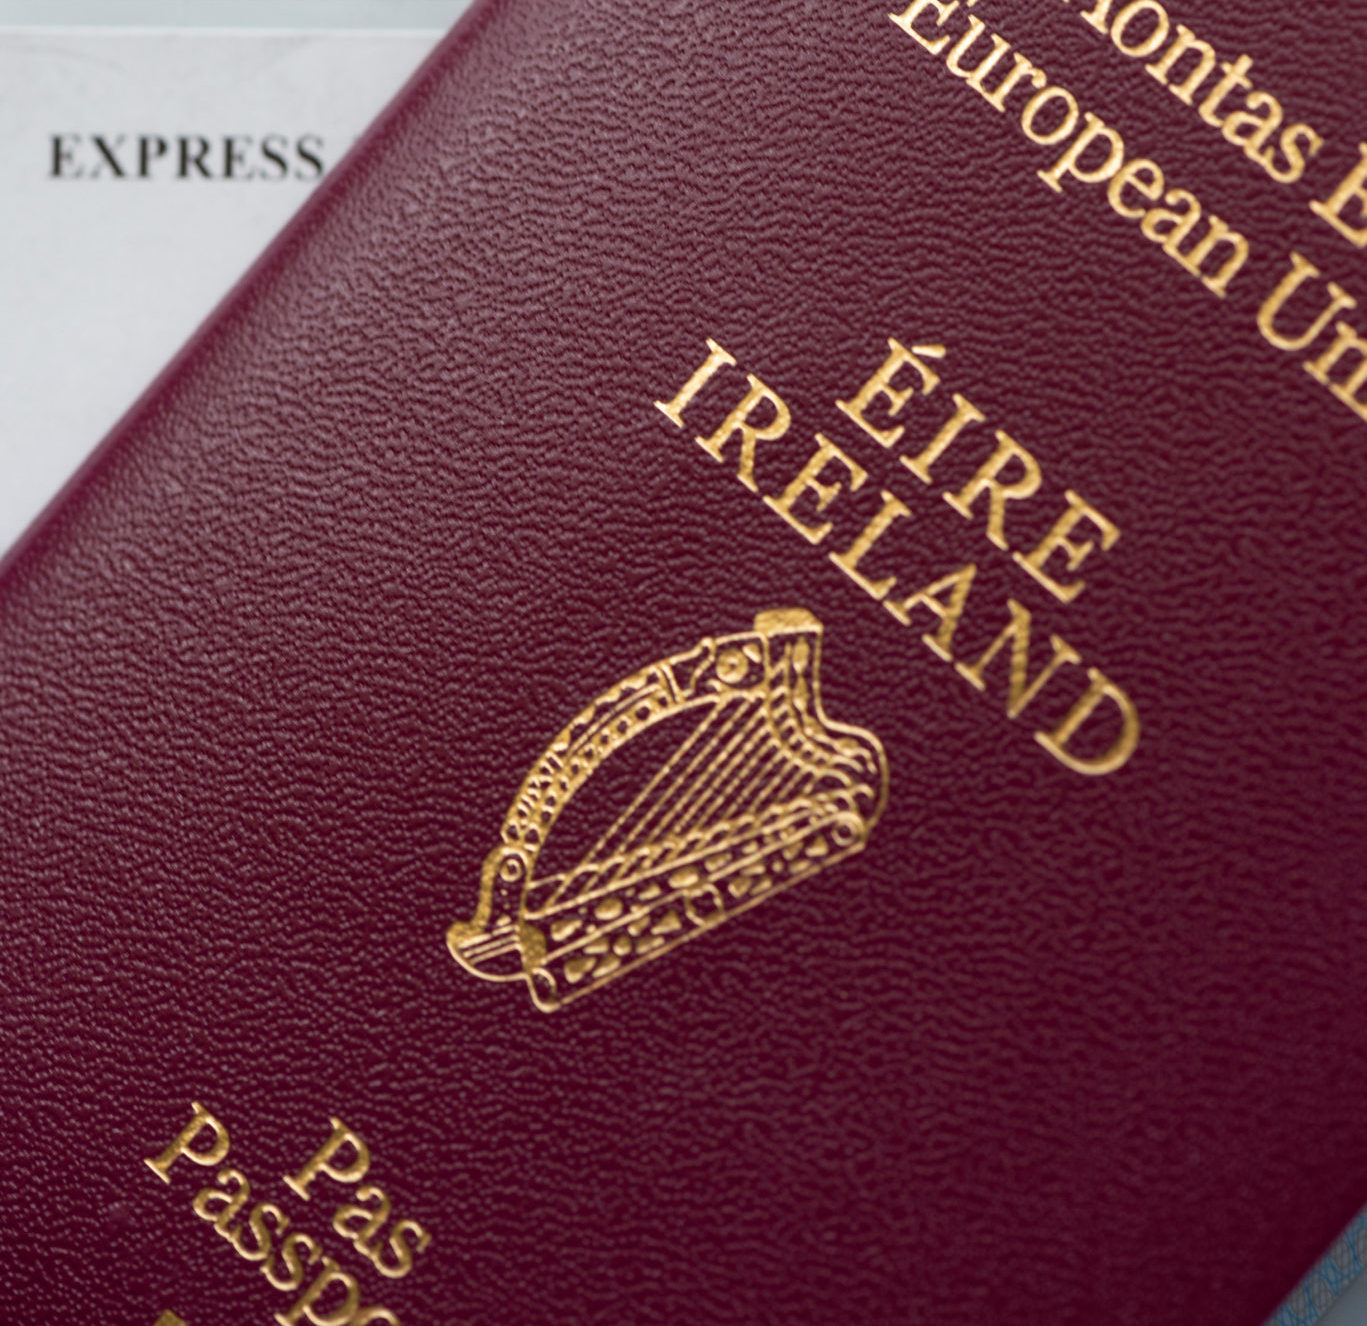 An Irish passport and Express Post red label are seen in September 2019.